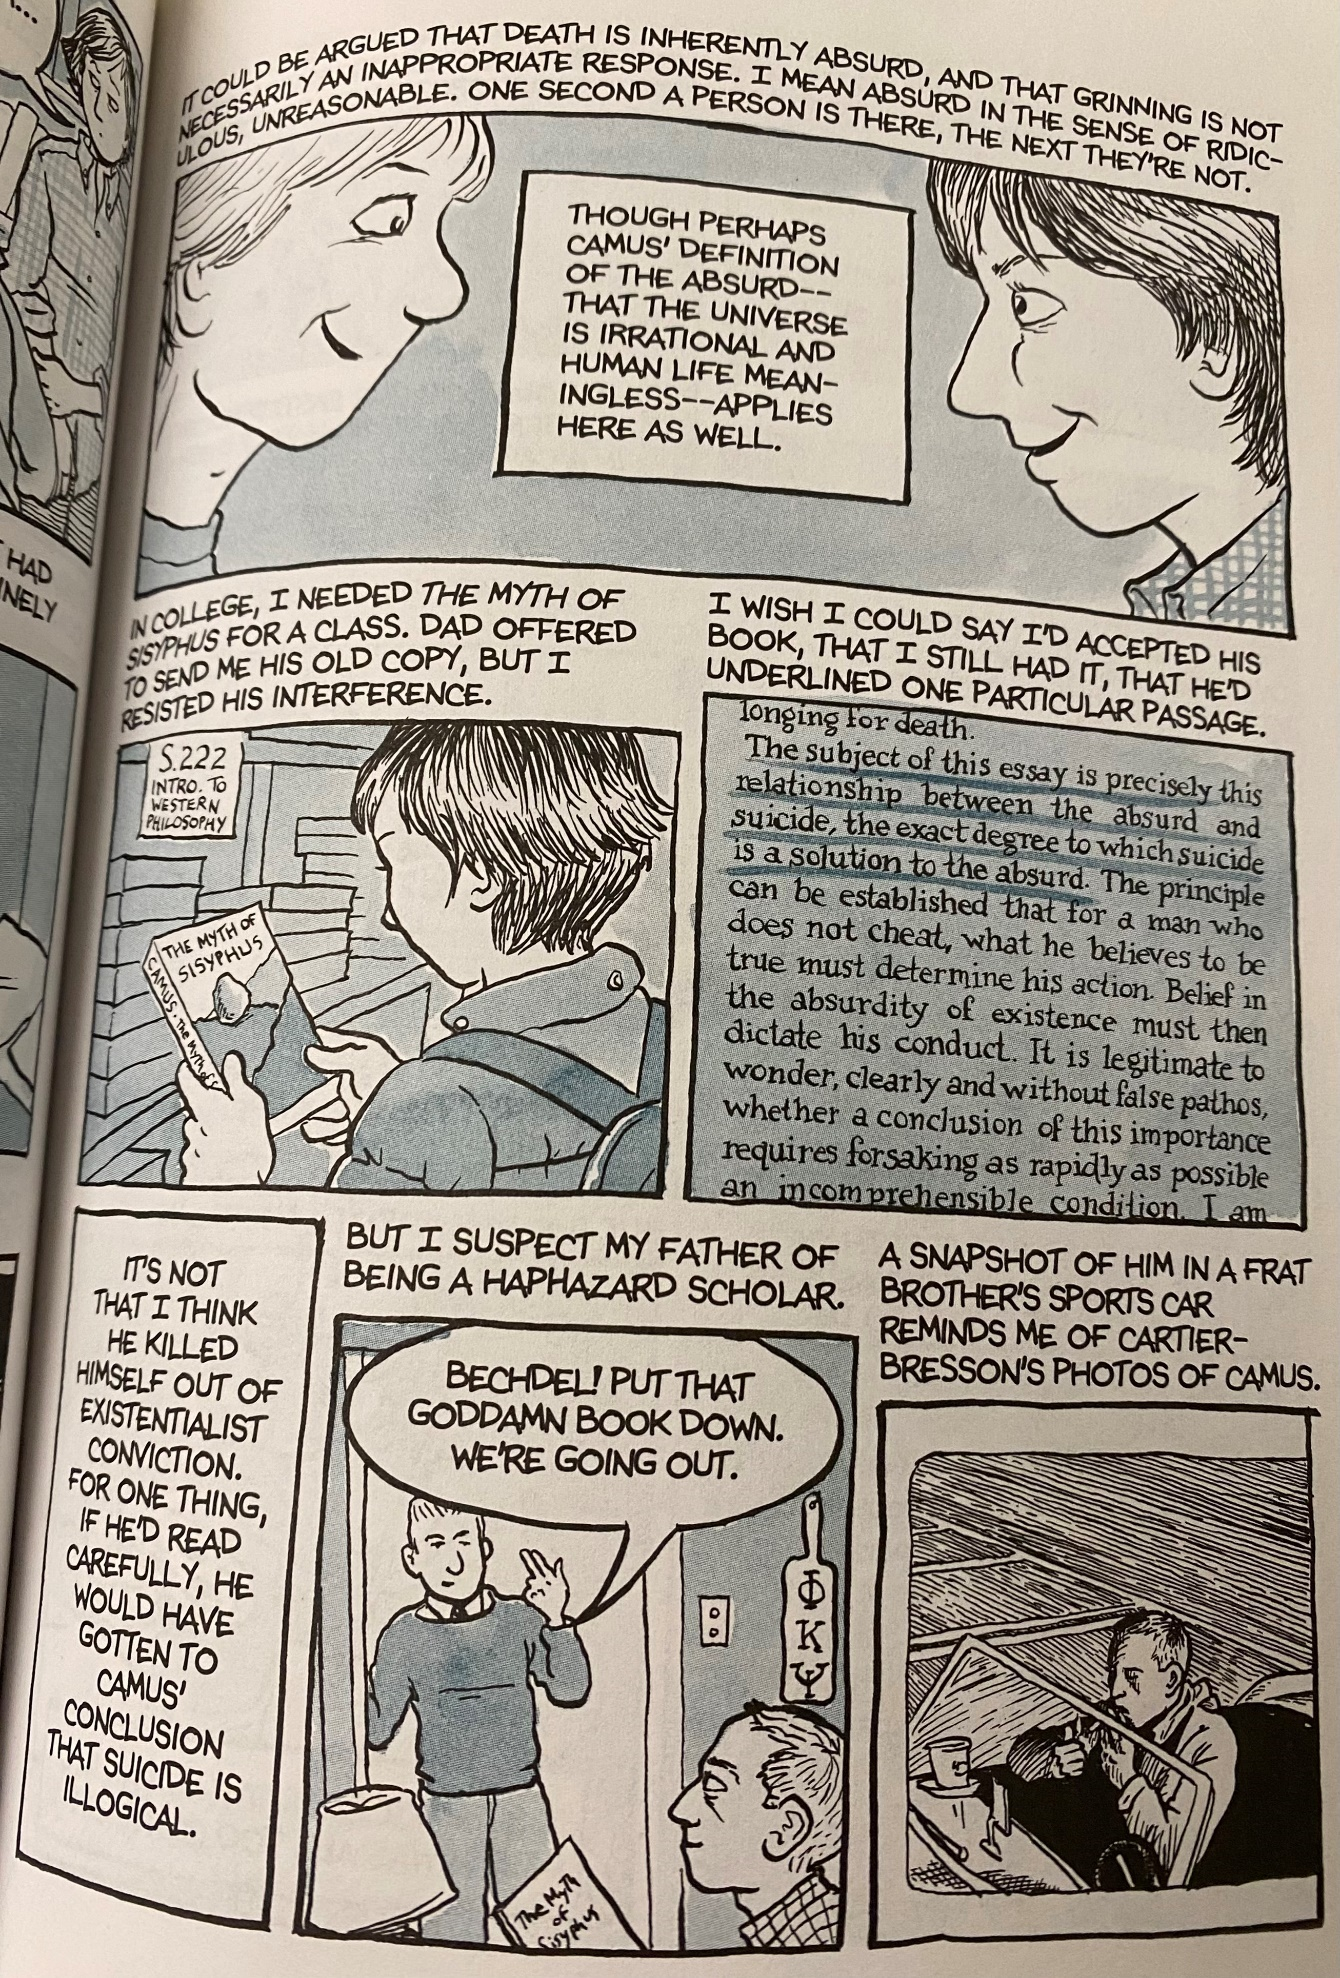 The absurdity panels from the book Fun Home.